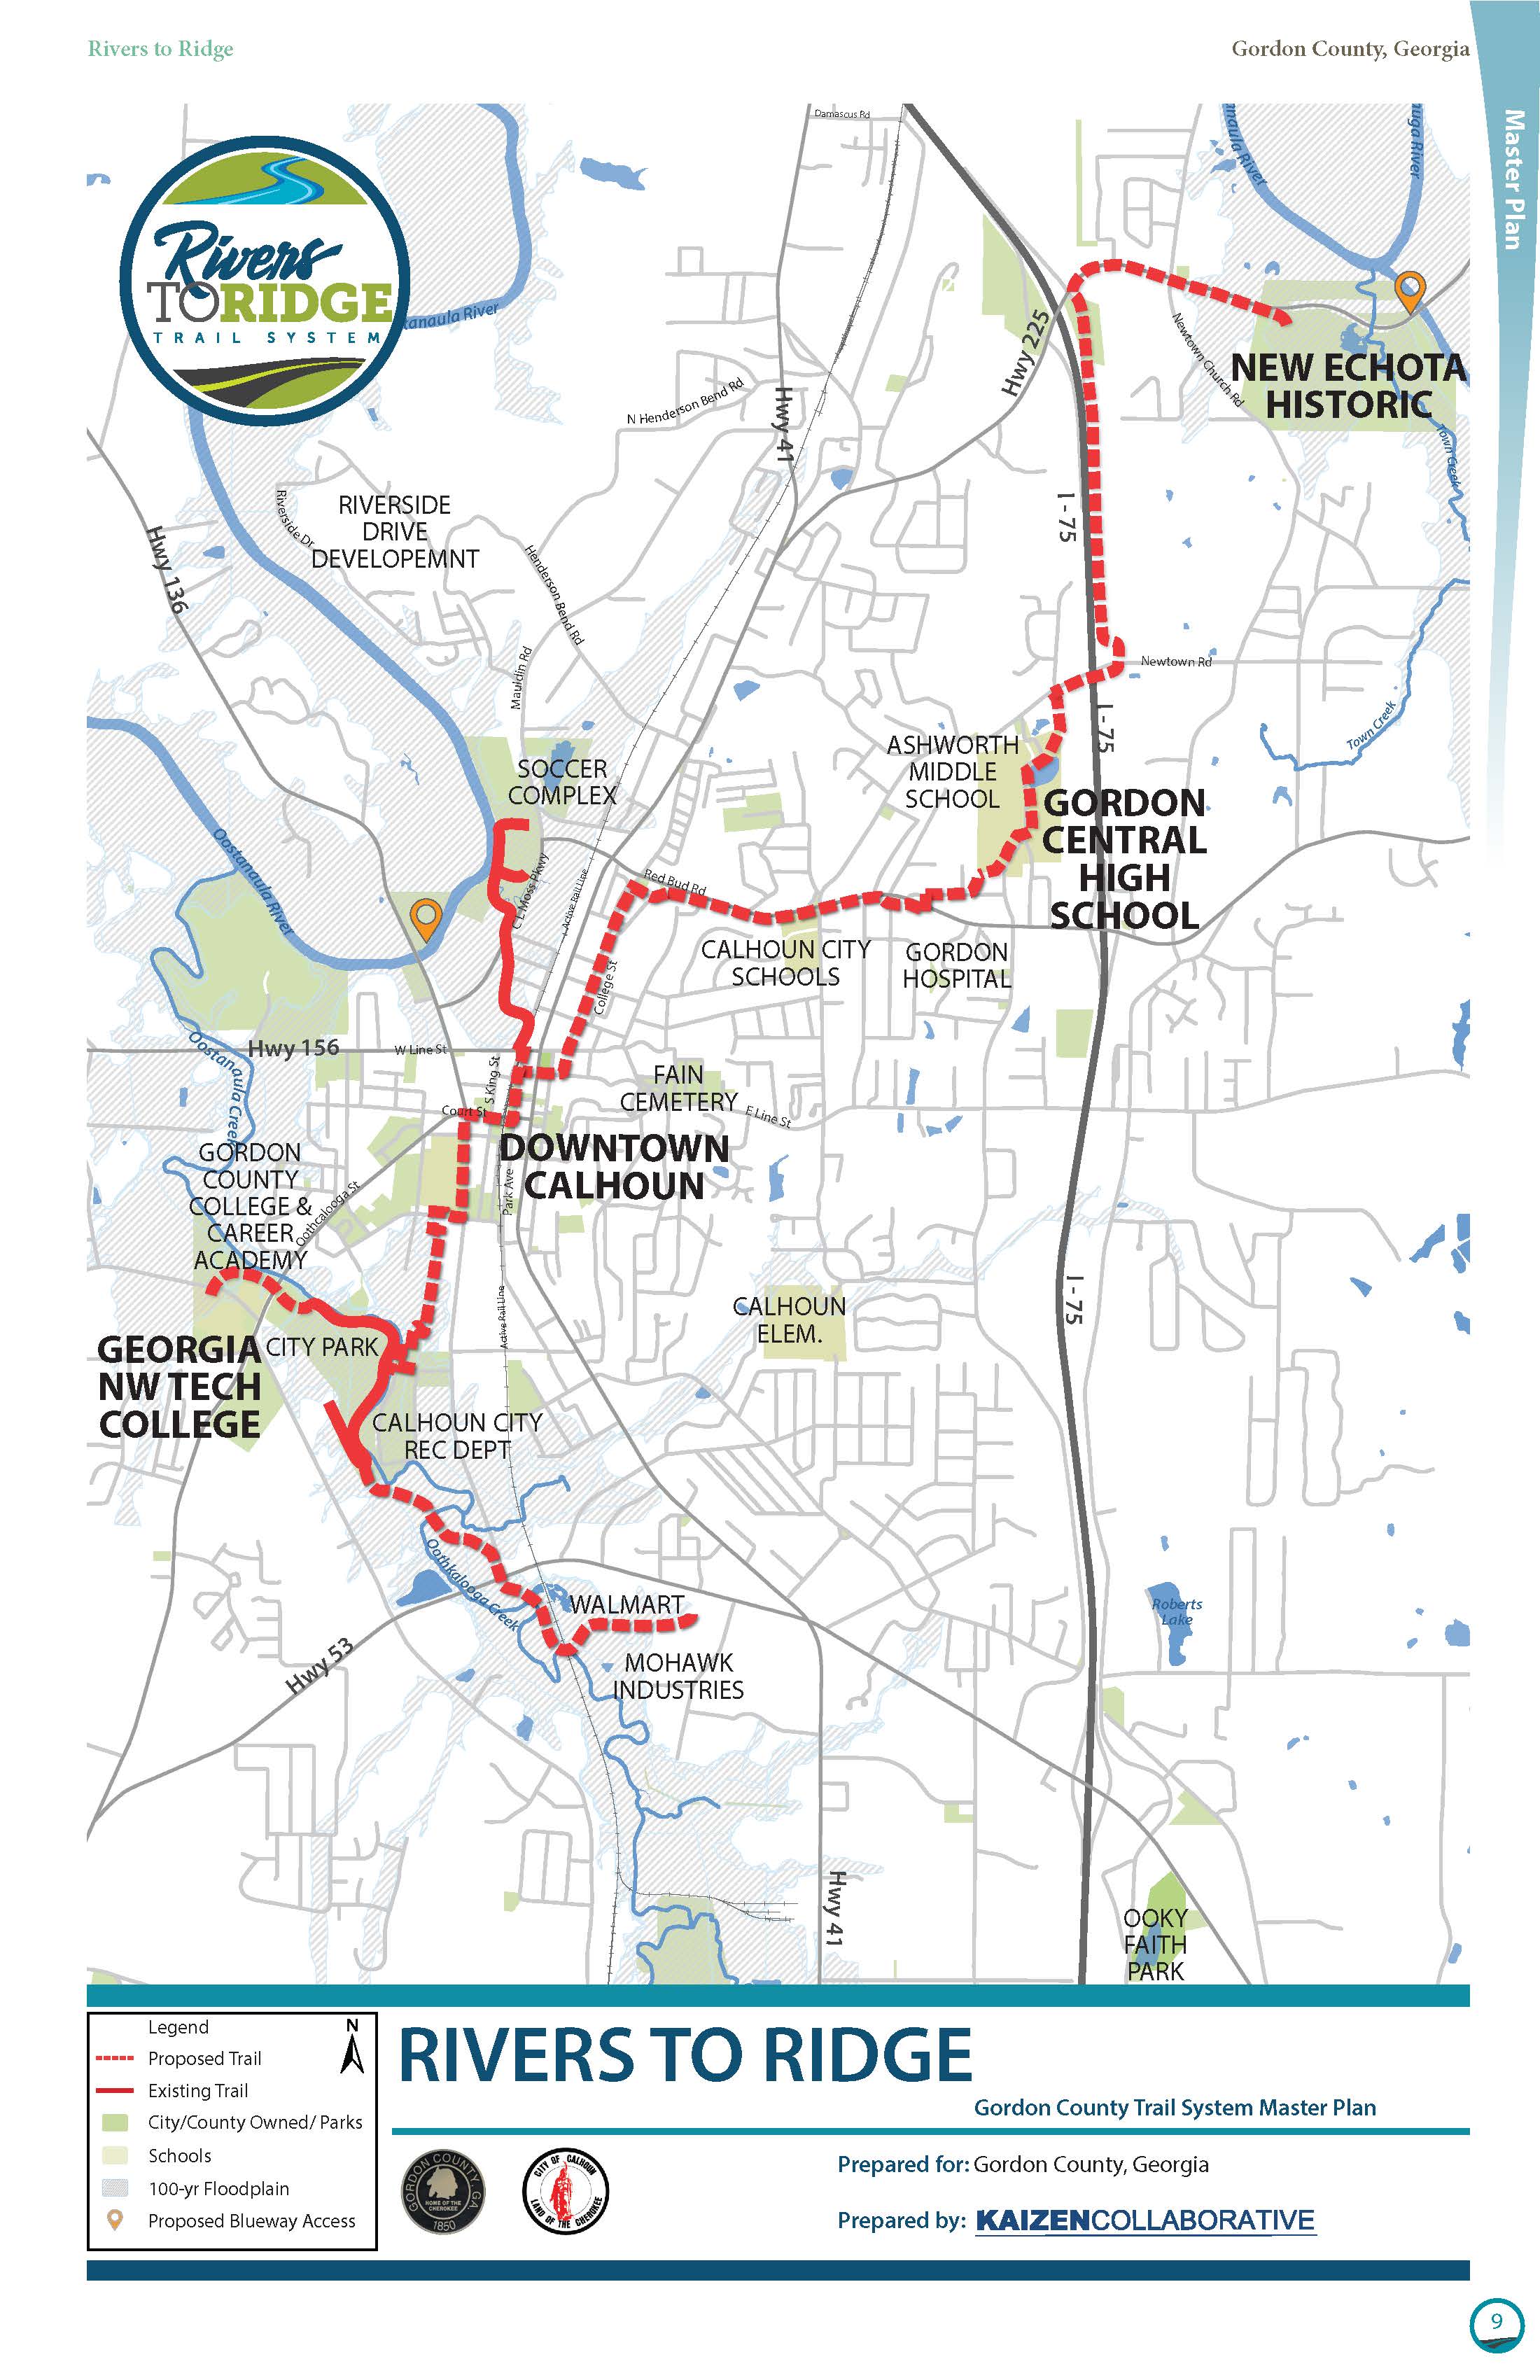 Proposed Overall Plan for the Rivers to Ridge Trail System